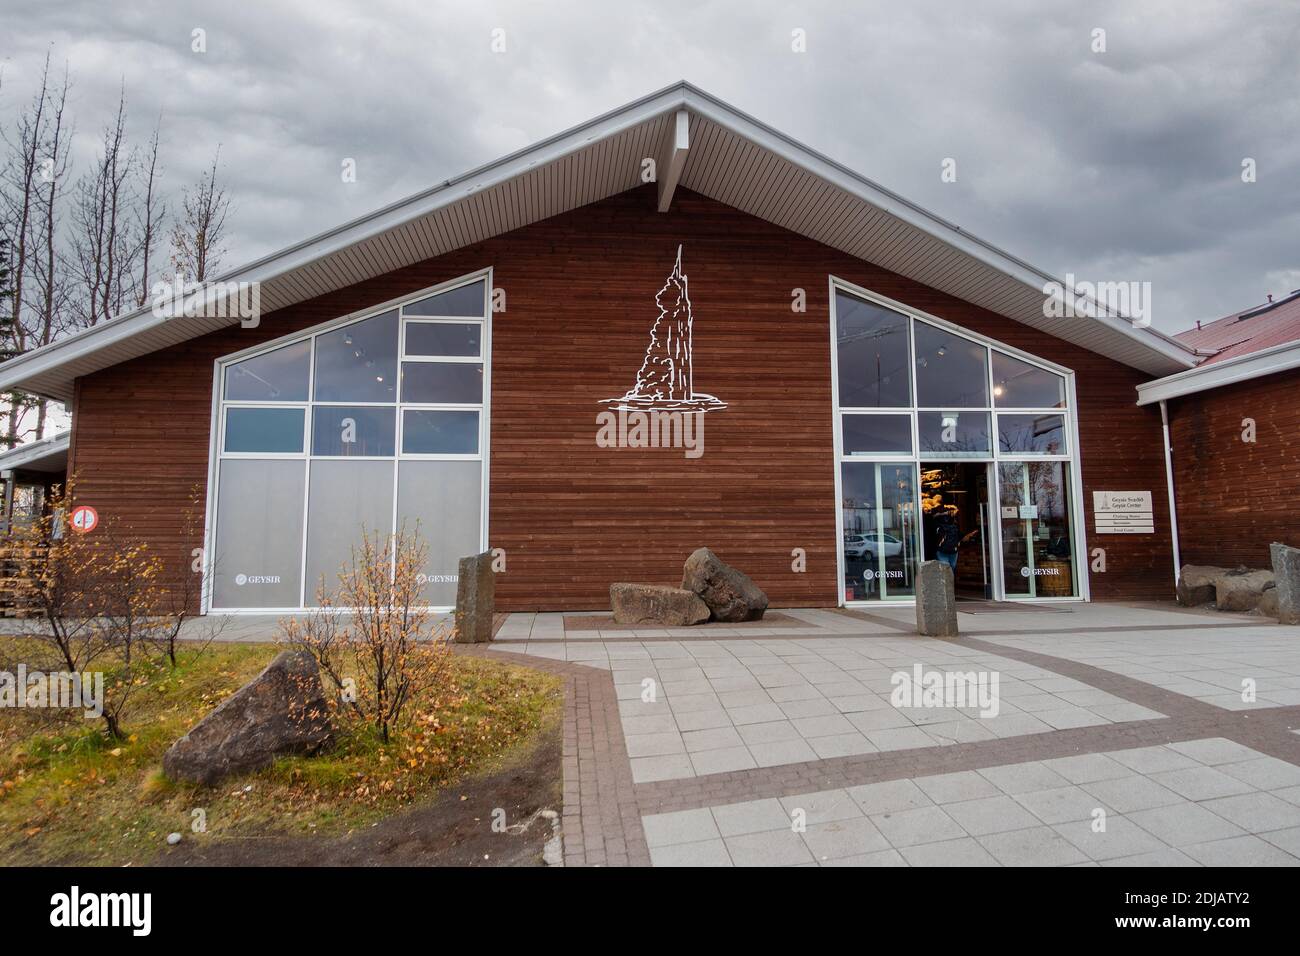 Geysir Visitor Centre And Gift Store The Hot Springs Area In Southwestern Iceland Home Of The Great Geyser Stock Photo